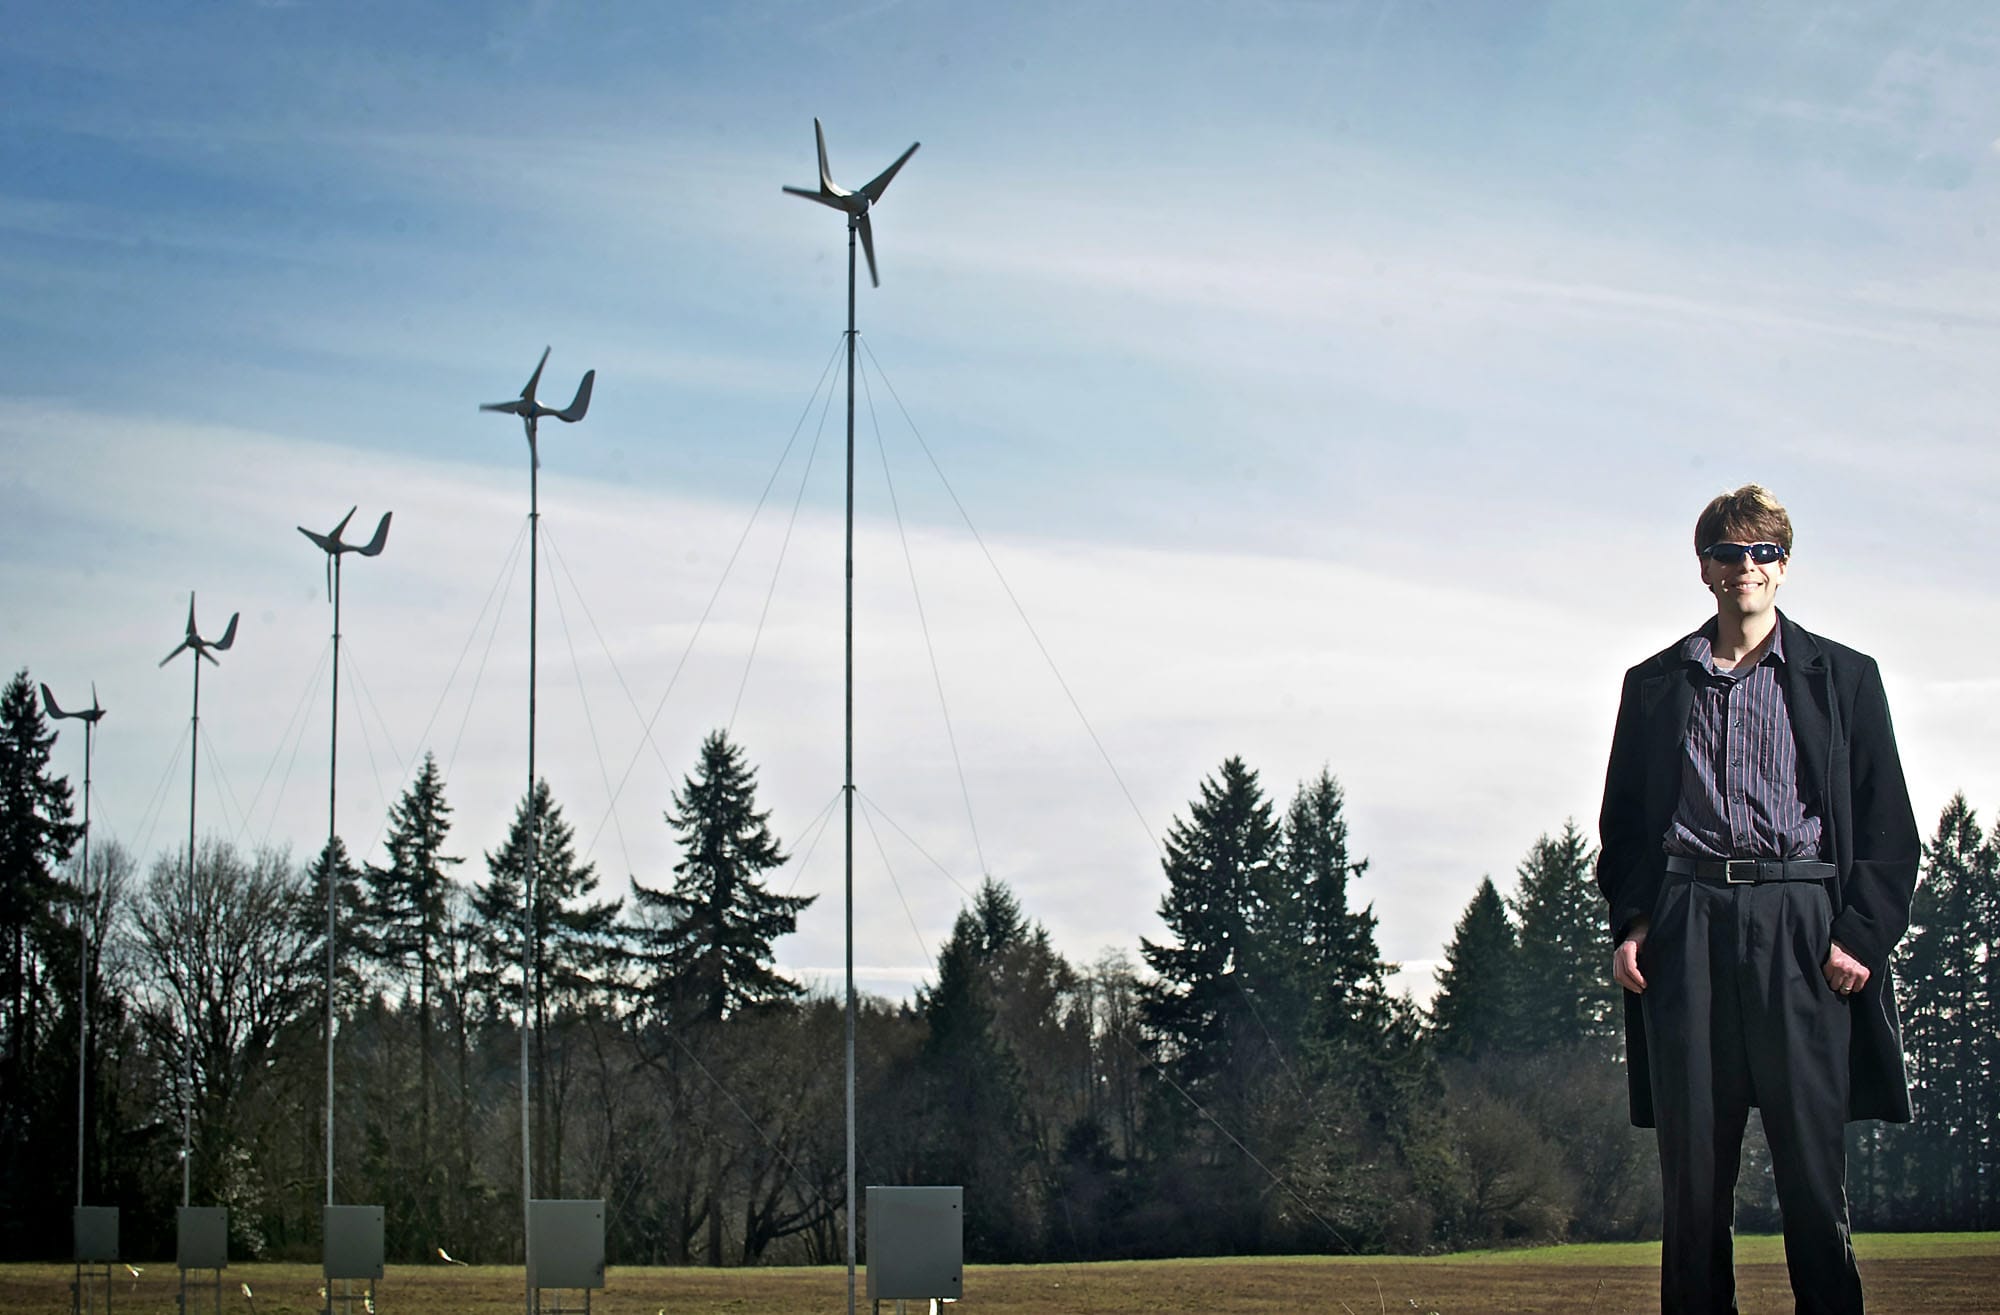 Stephen Solovitz, a mechanical engineering instructor at Washington State University Vancouver, manages a small-scale wind farm recently installed on campus.